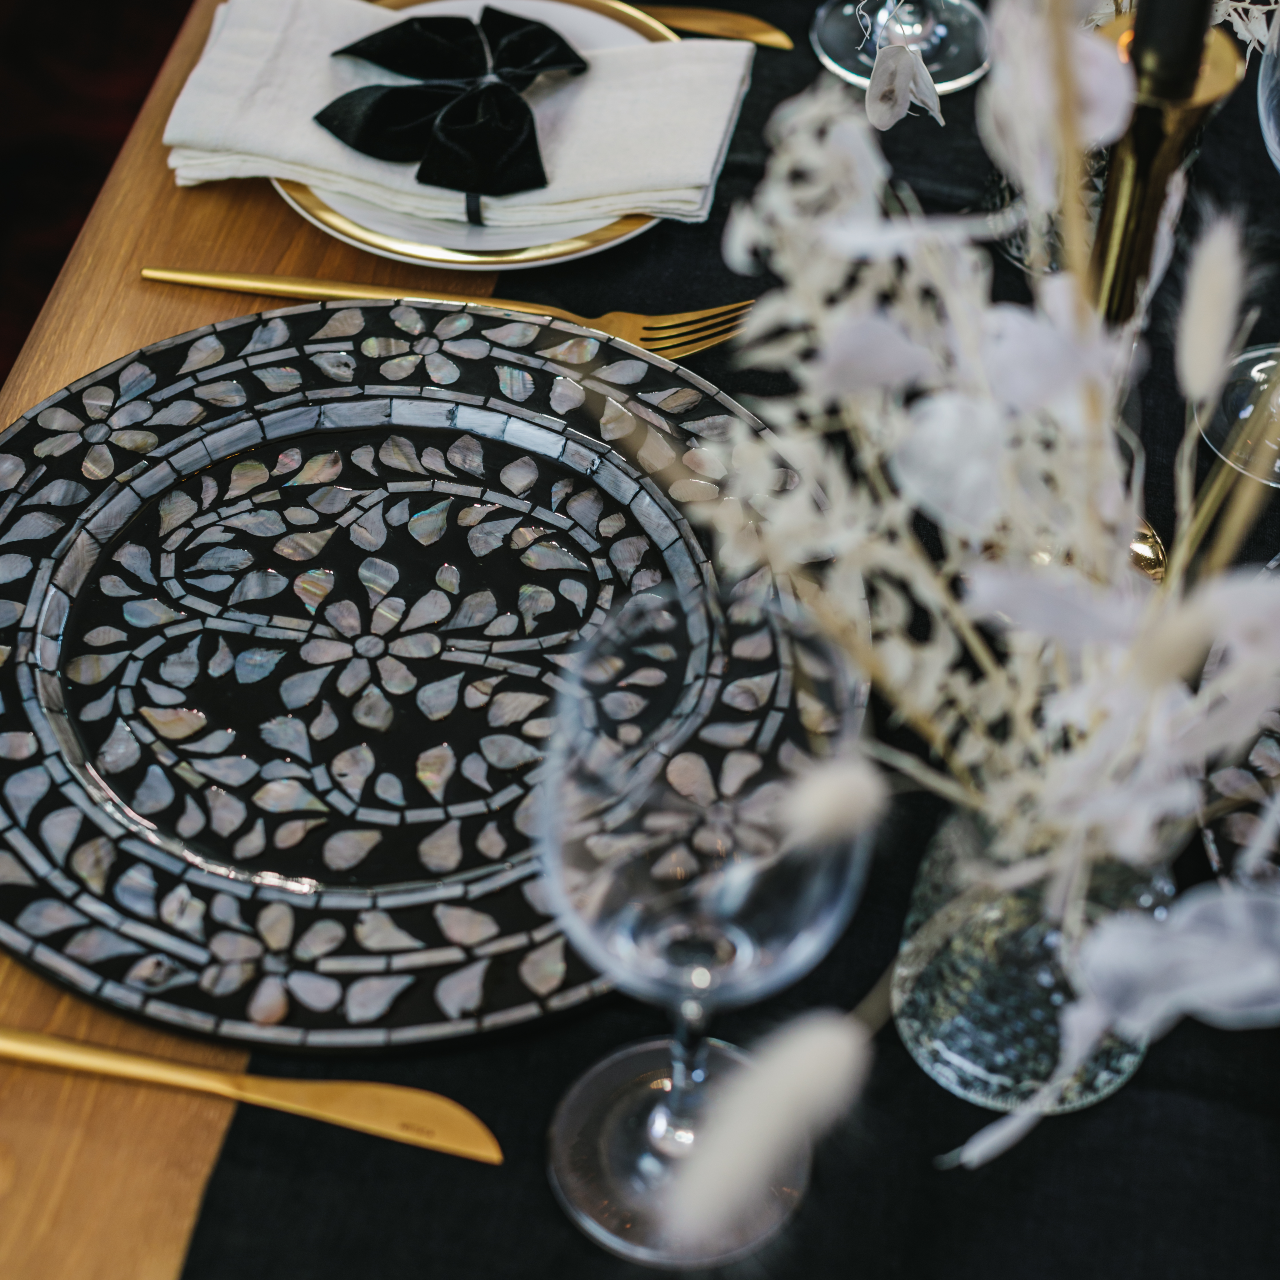 Side image of statement black and white mother of pearl inlay charger plates set with gold cutlery, 100% black linen table runner, white linen napkins, luxe black velvet napkin bows and dried grass posies